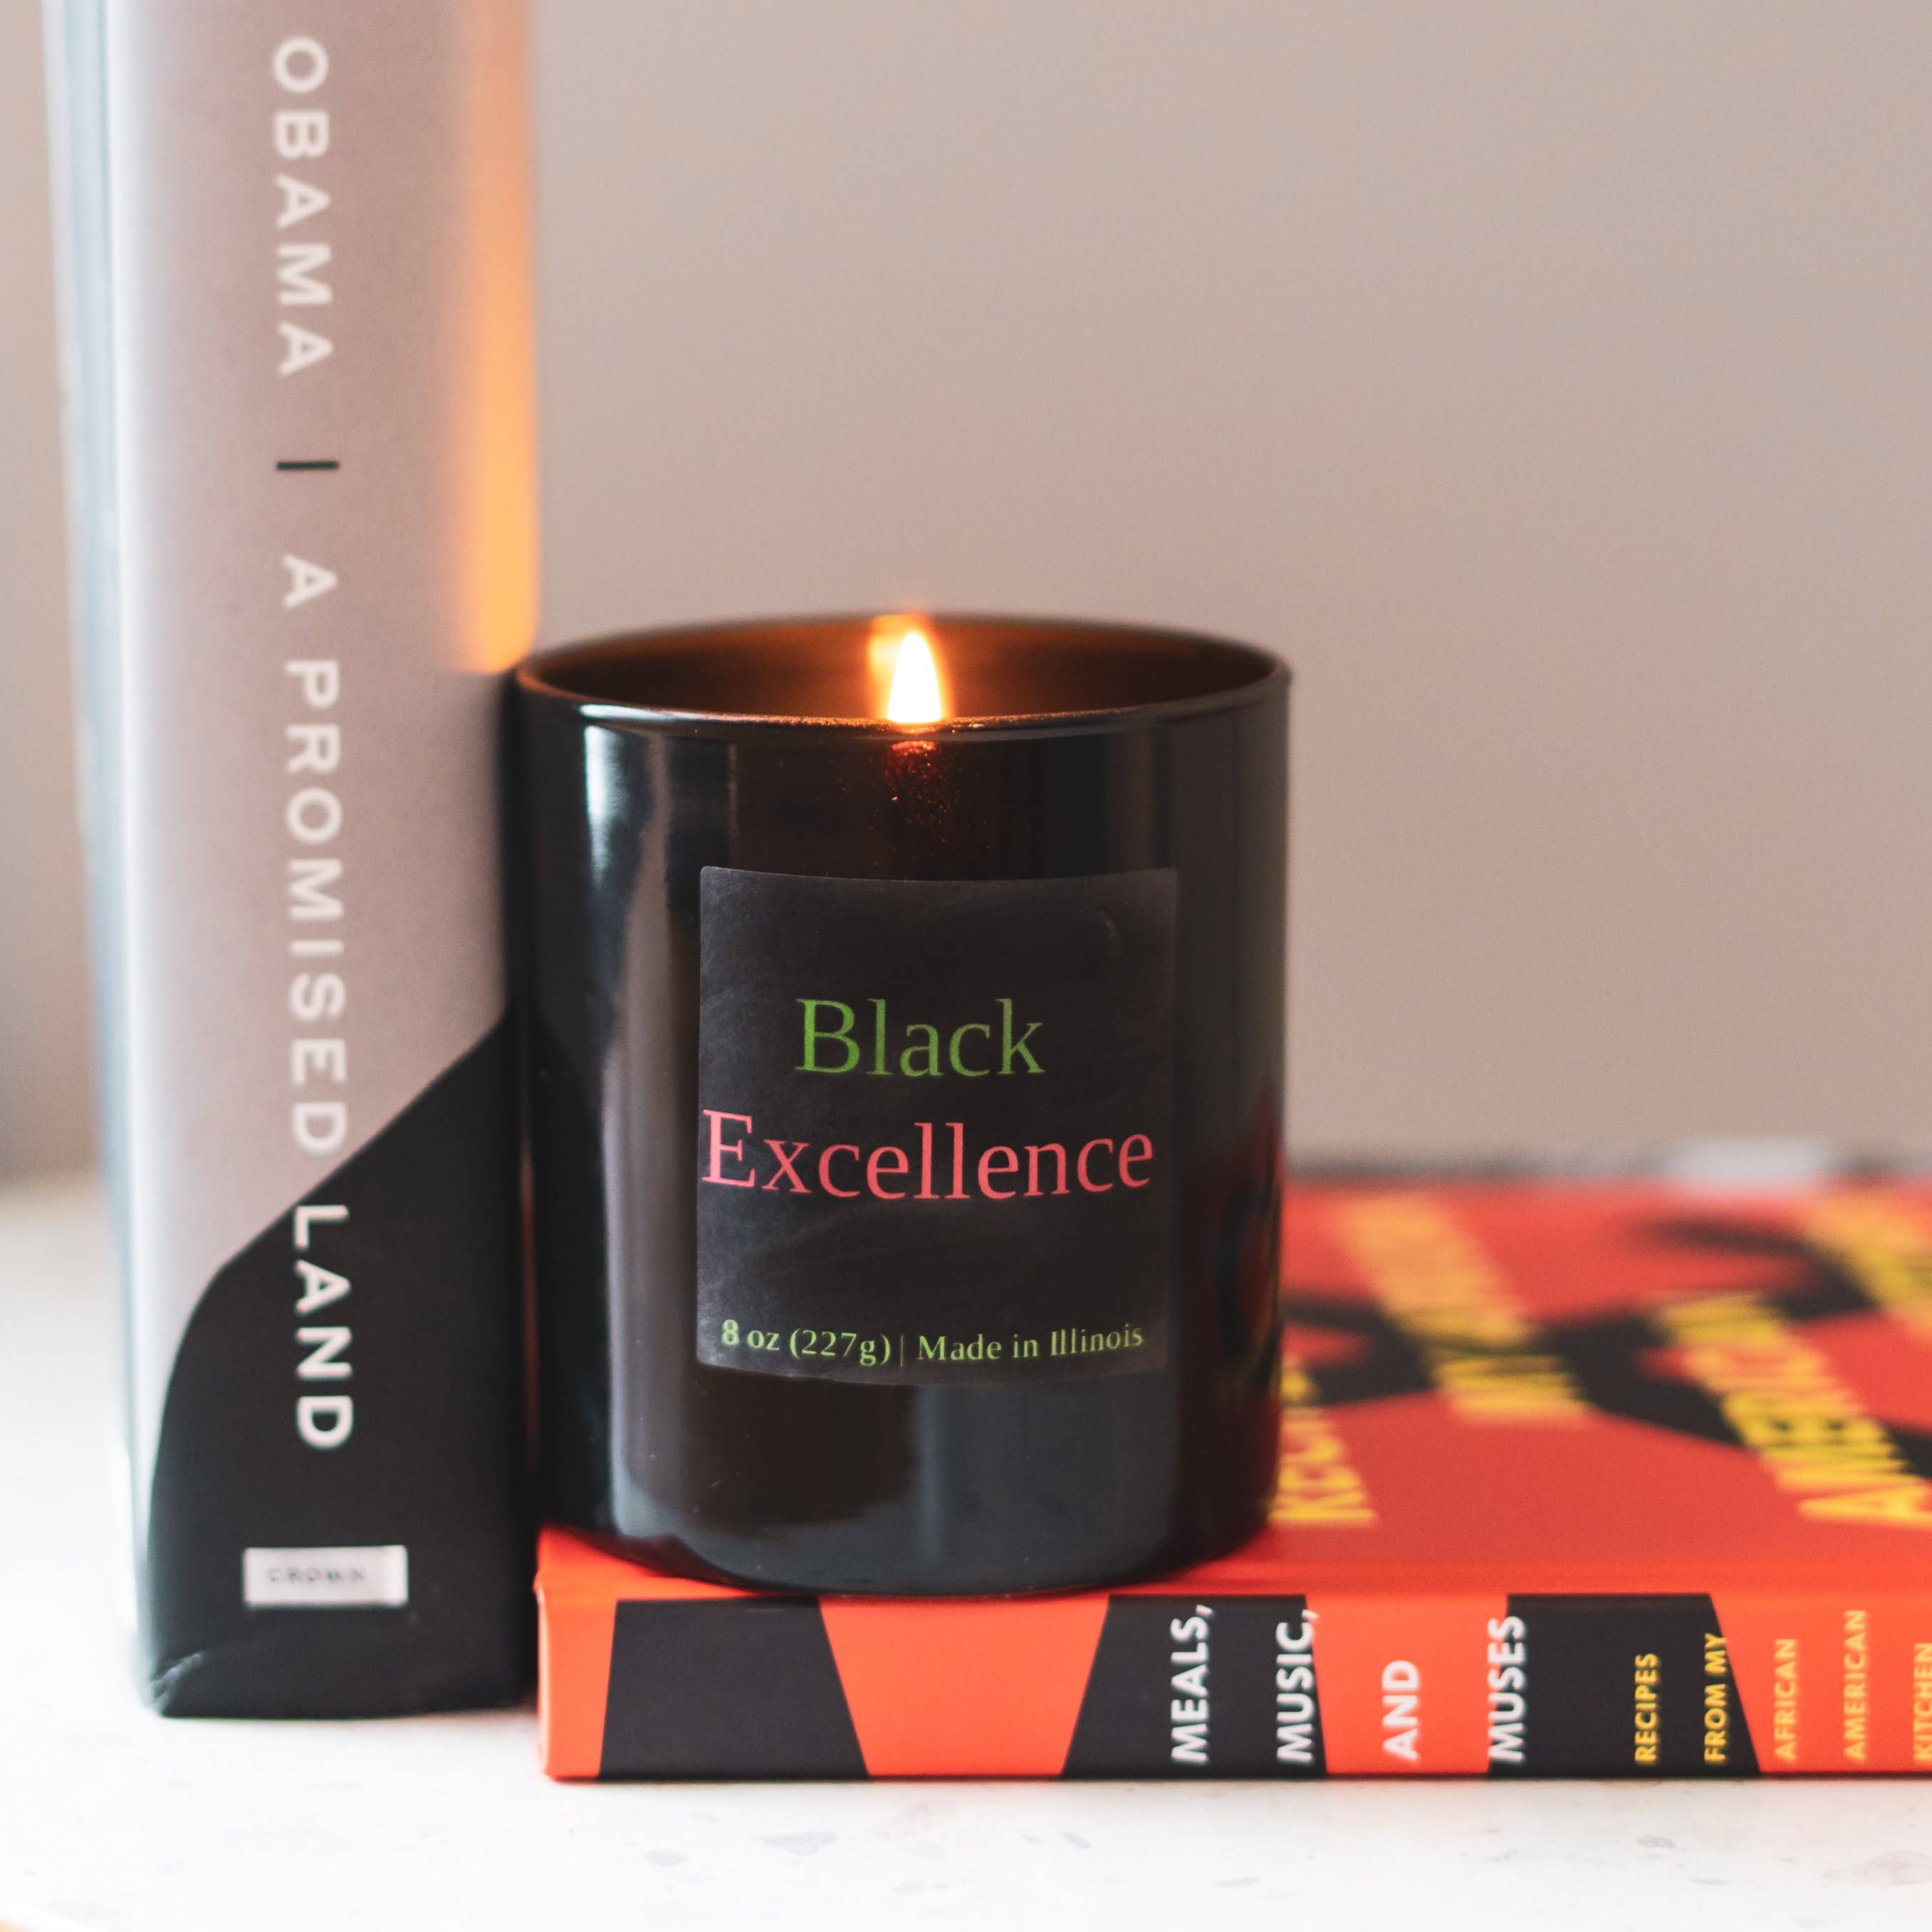 Black Excellence Candle